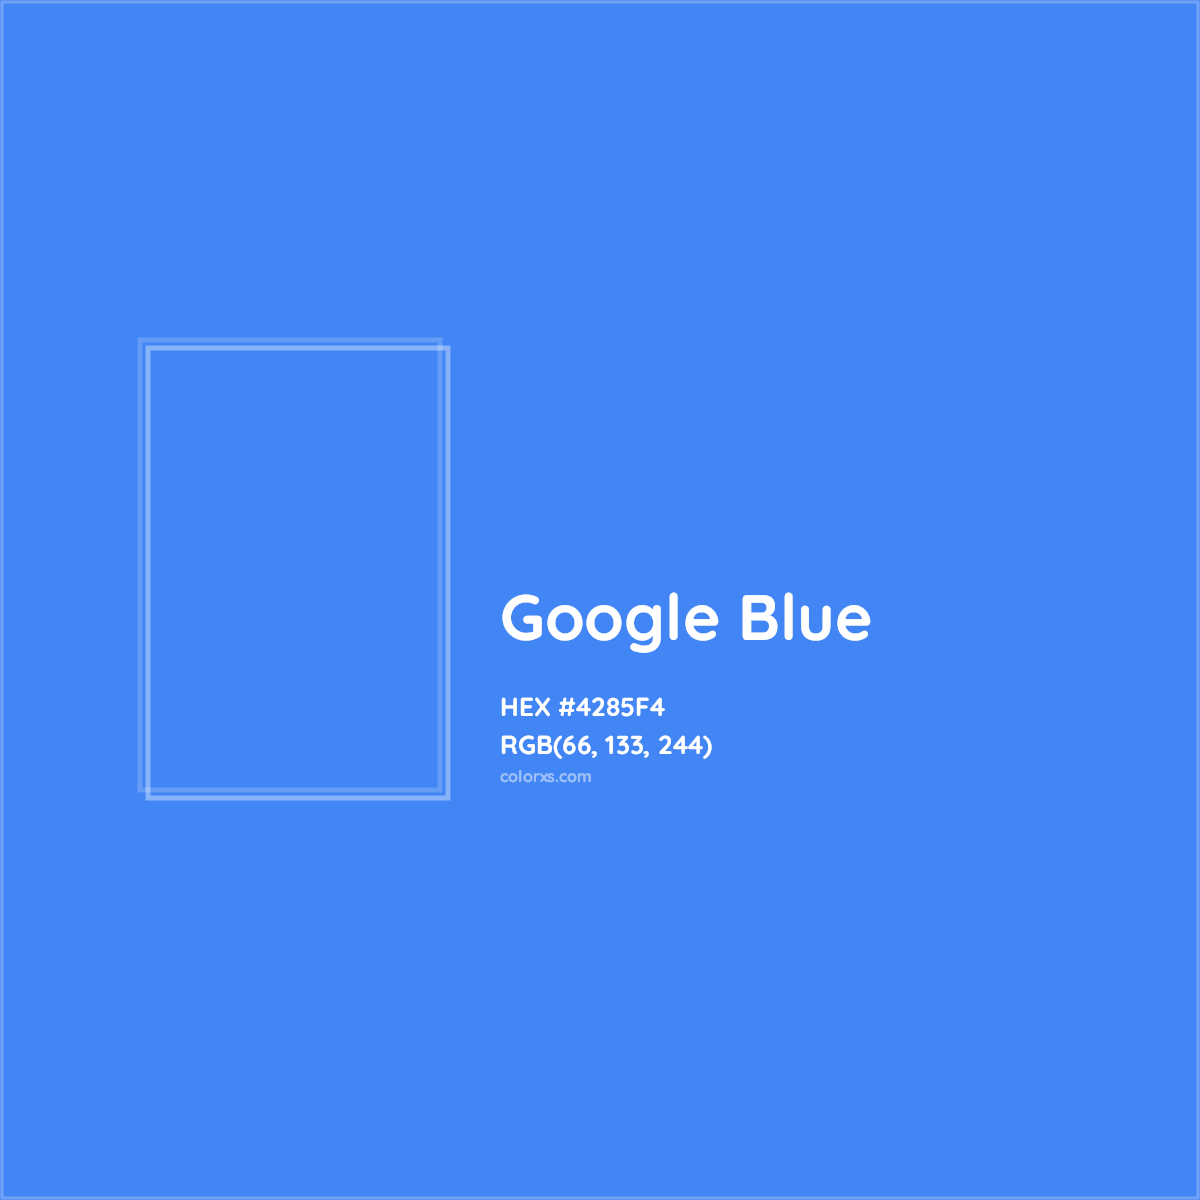 HEX #4285F4 Google Blue Other Brand - Color Code